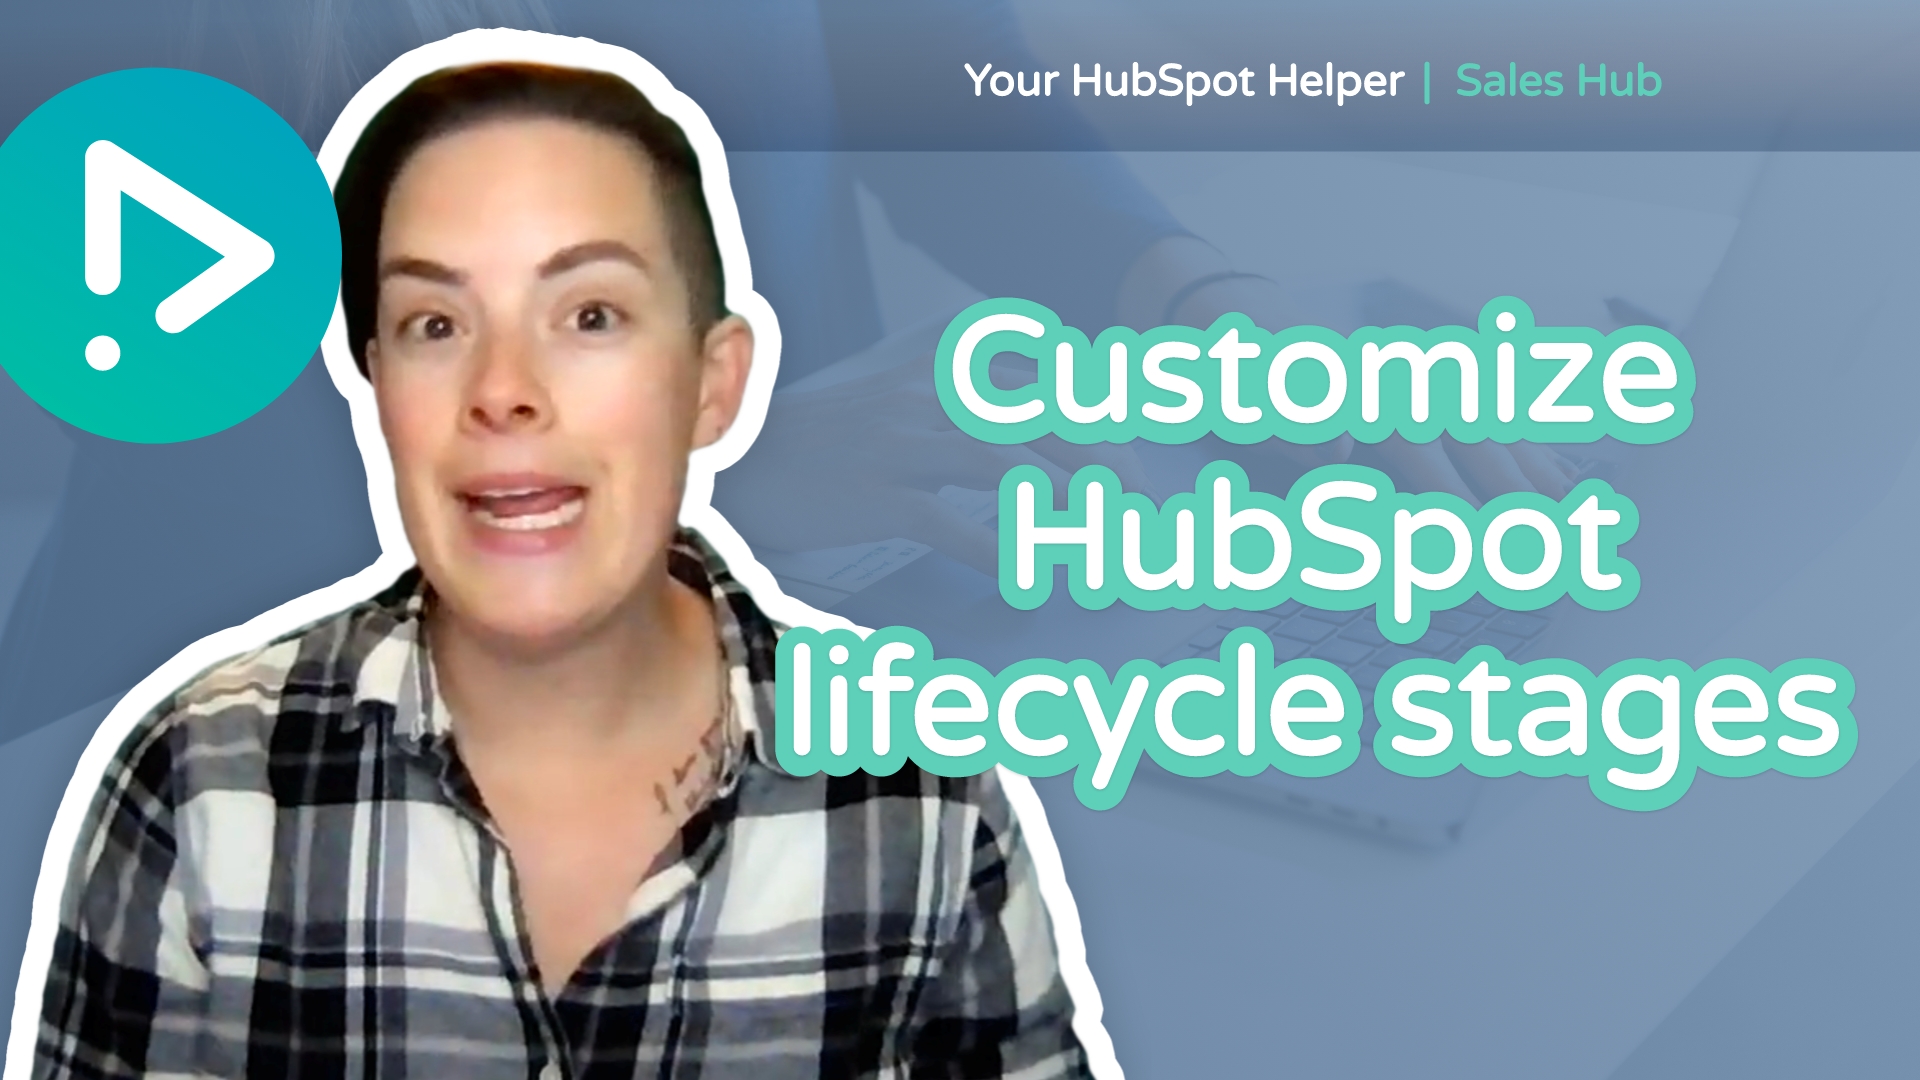 How to customize HubSpot lifecycle stages video